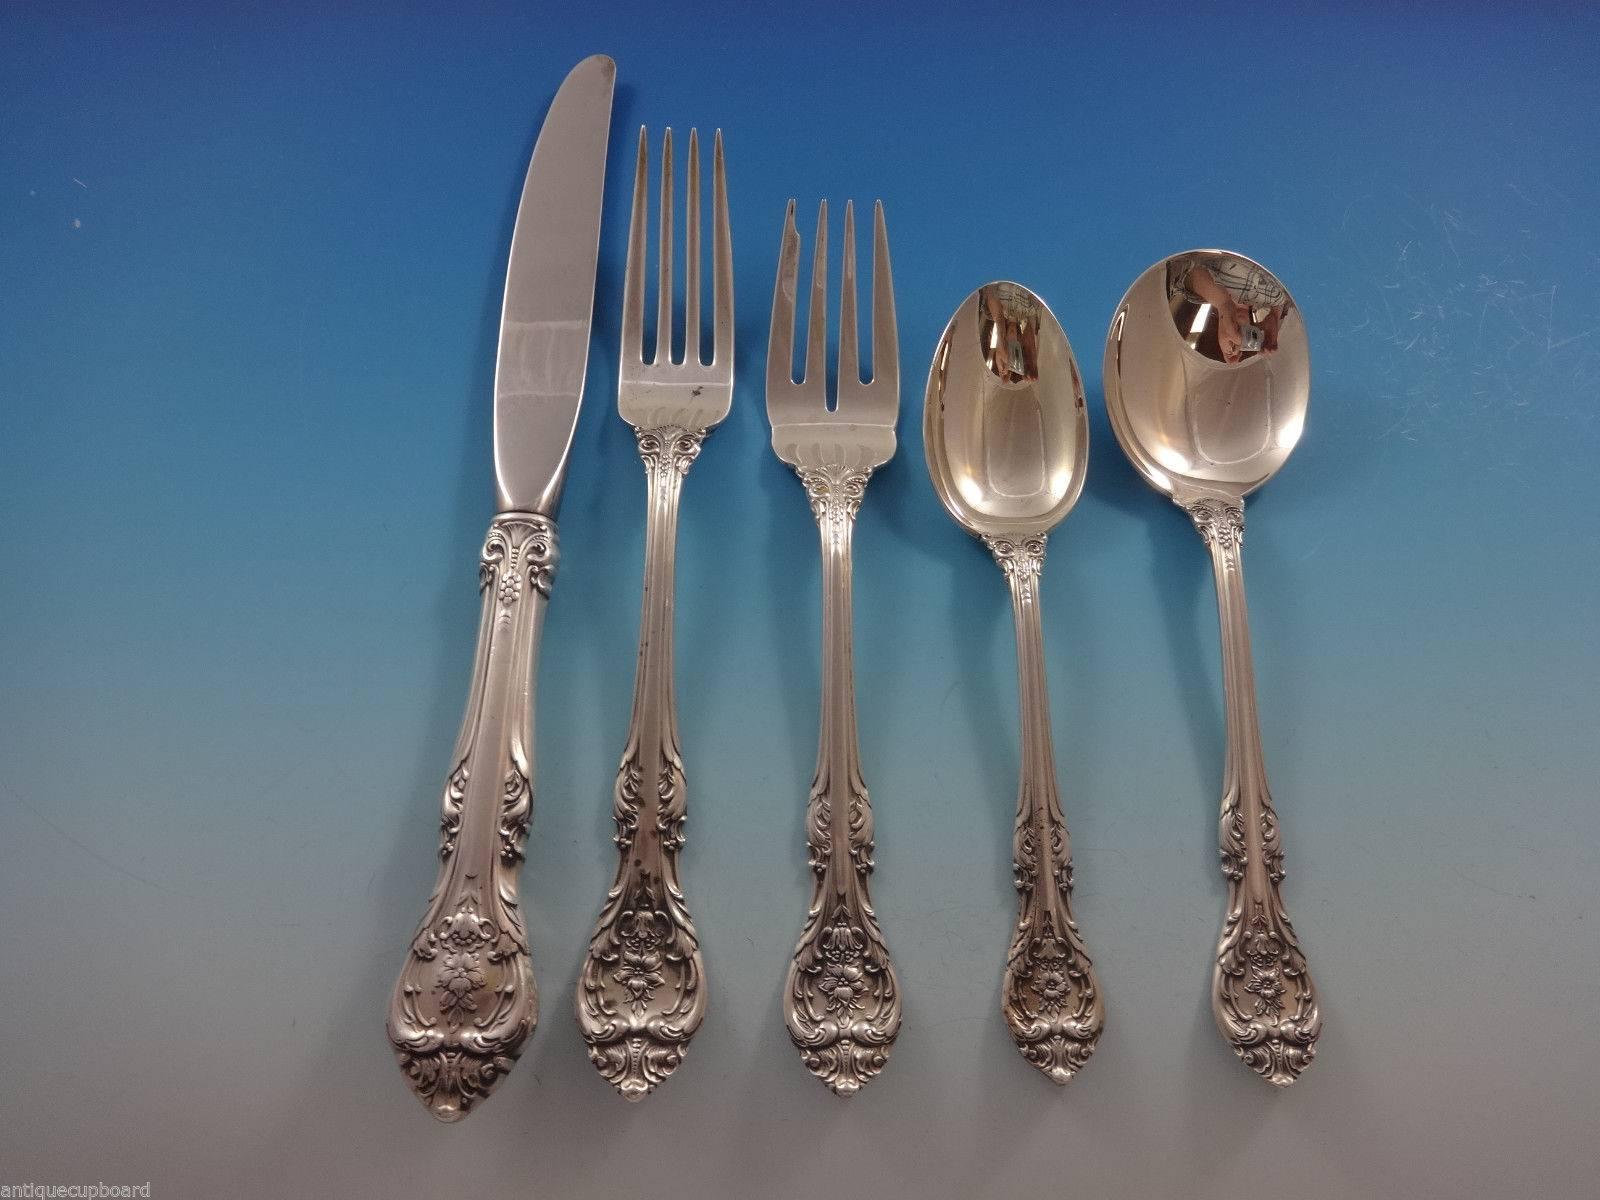 The King Edward pattern lends a regal flair to your table décor. Intricately sculpted handles reflect superior Gorham design and craftsmanship.

King Edward by Gorham sterling silver place size flatware set of 40 pieces. This set